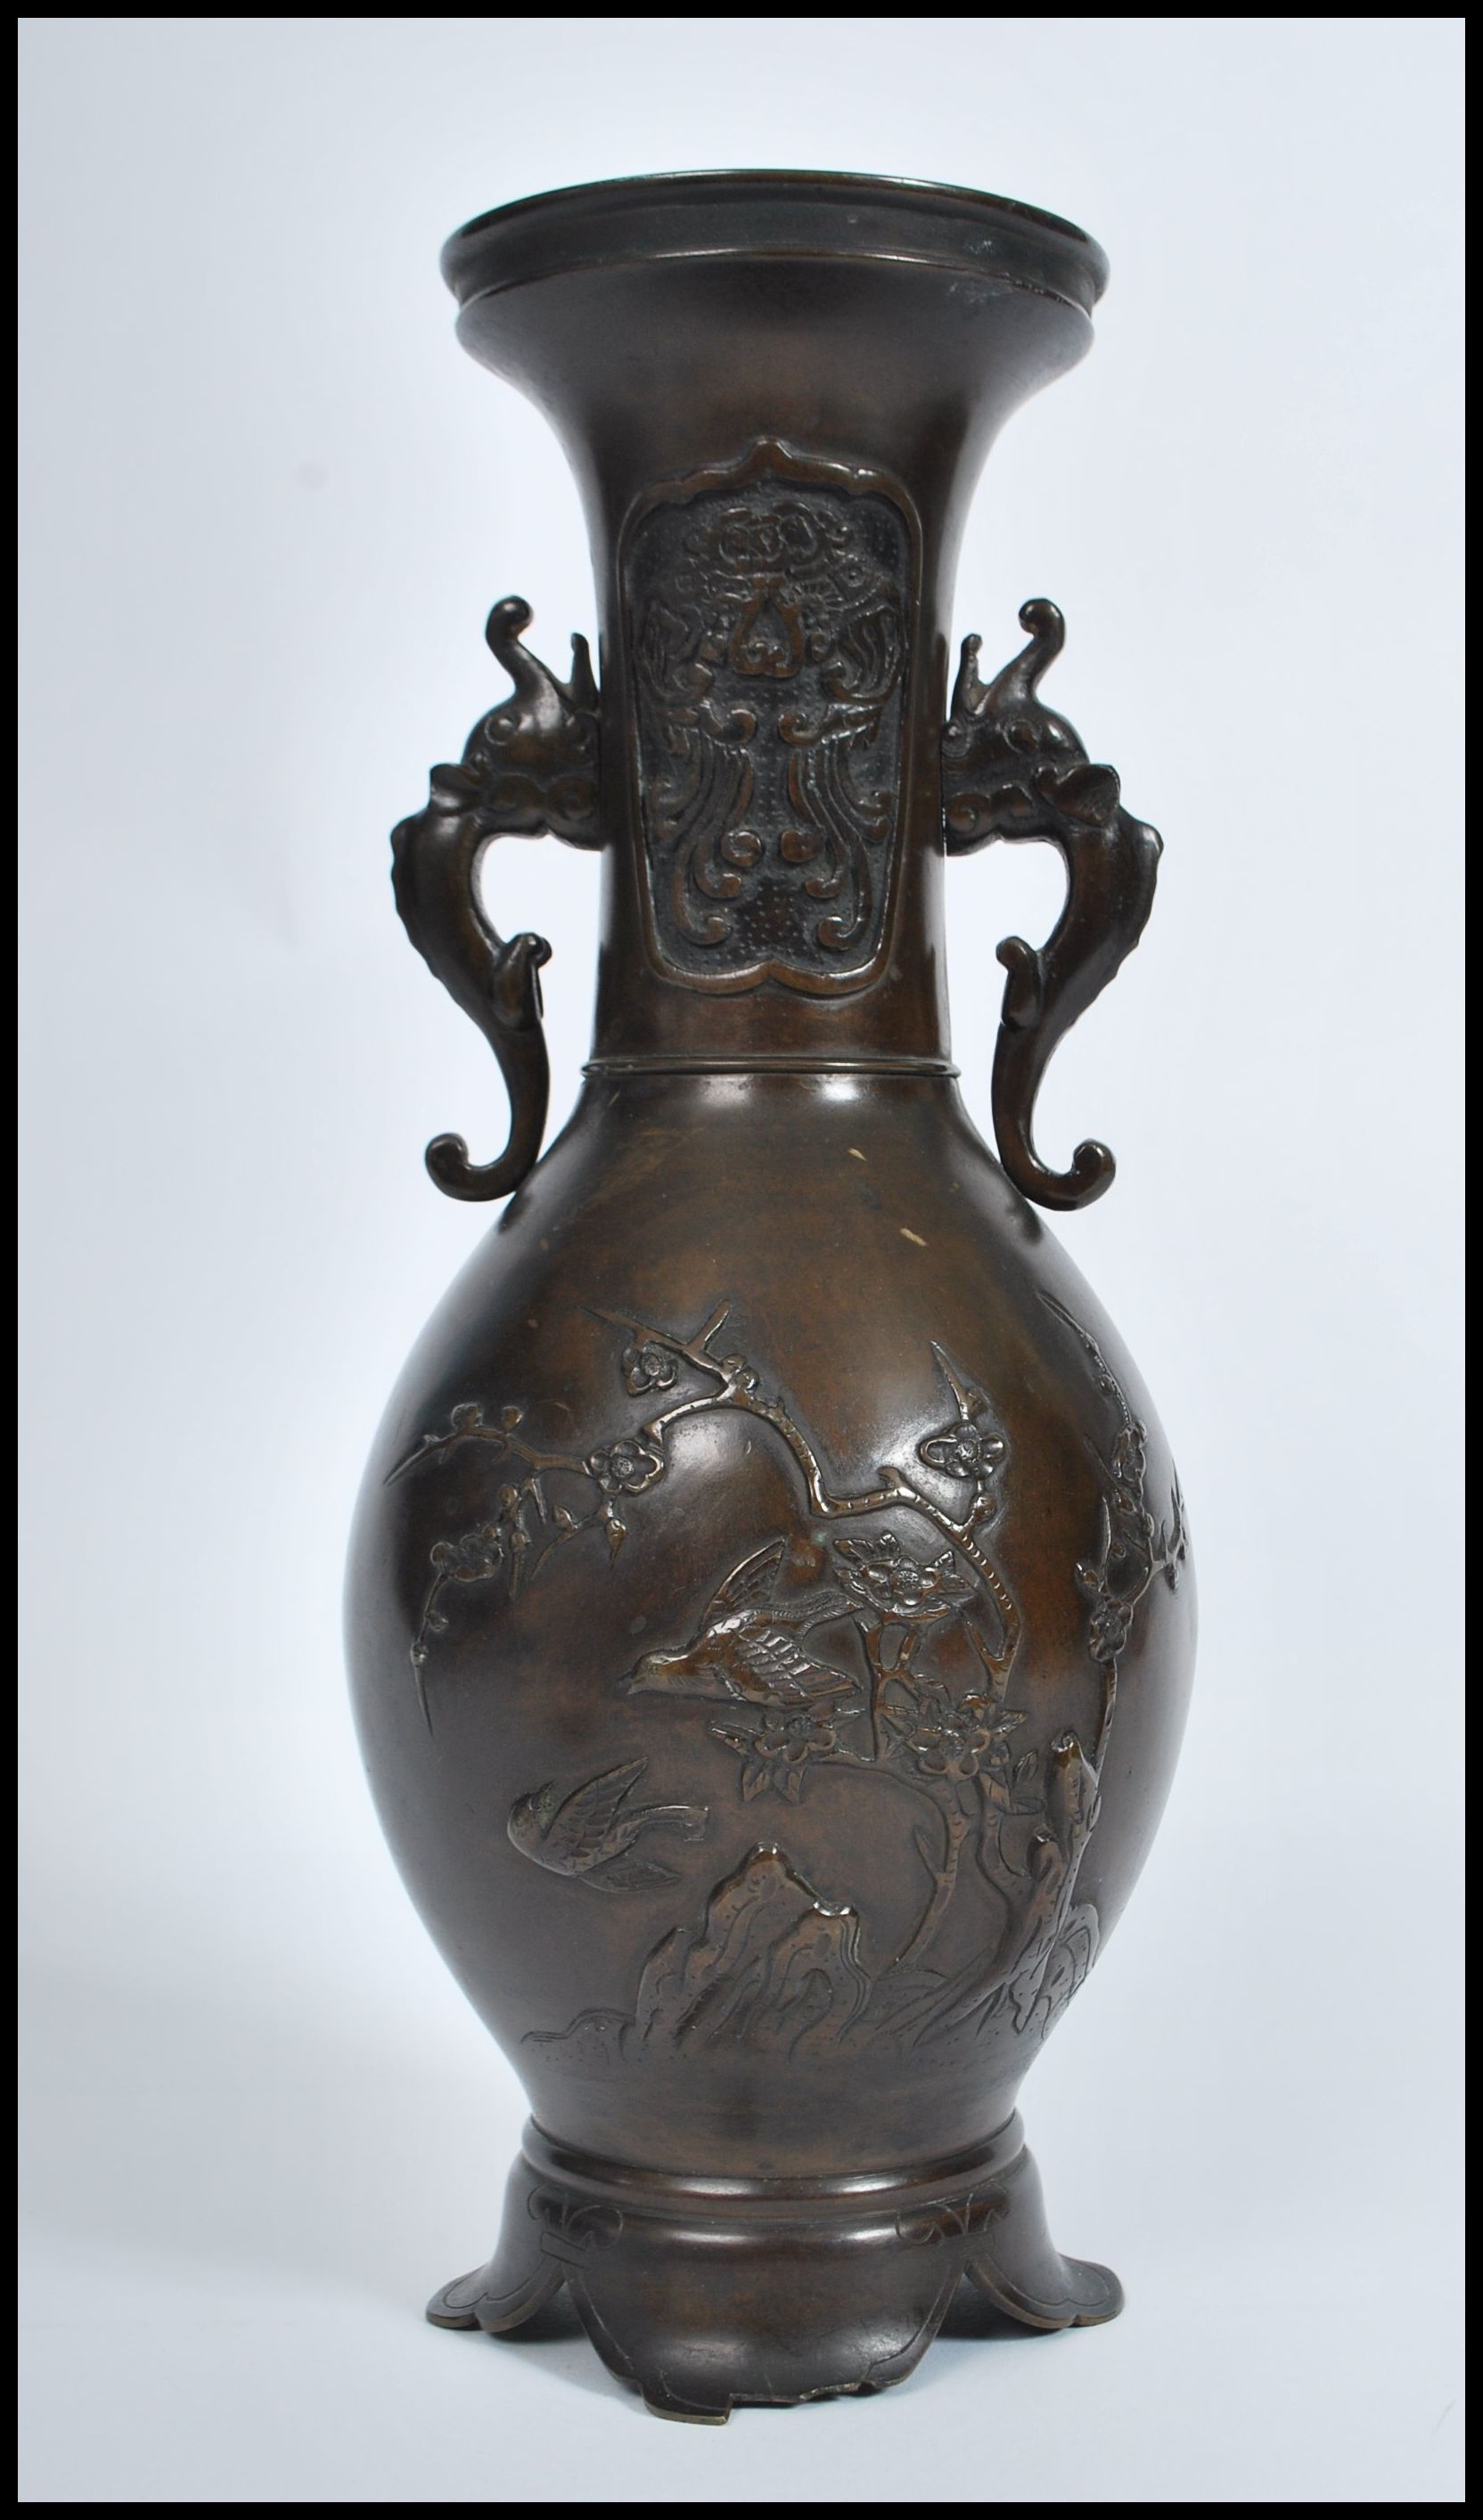 A Meji period Japanese bronze two handled vase of typical baluster form, decorated in relief with